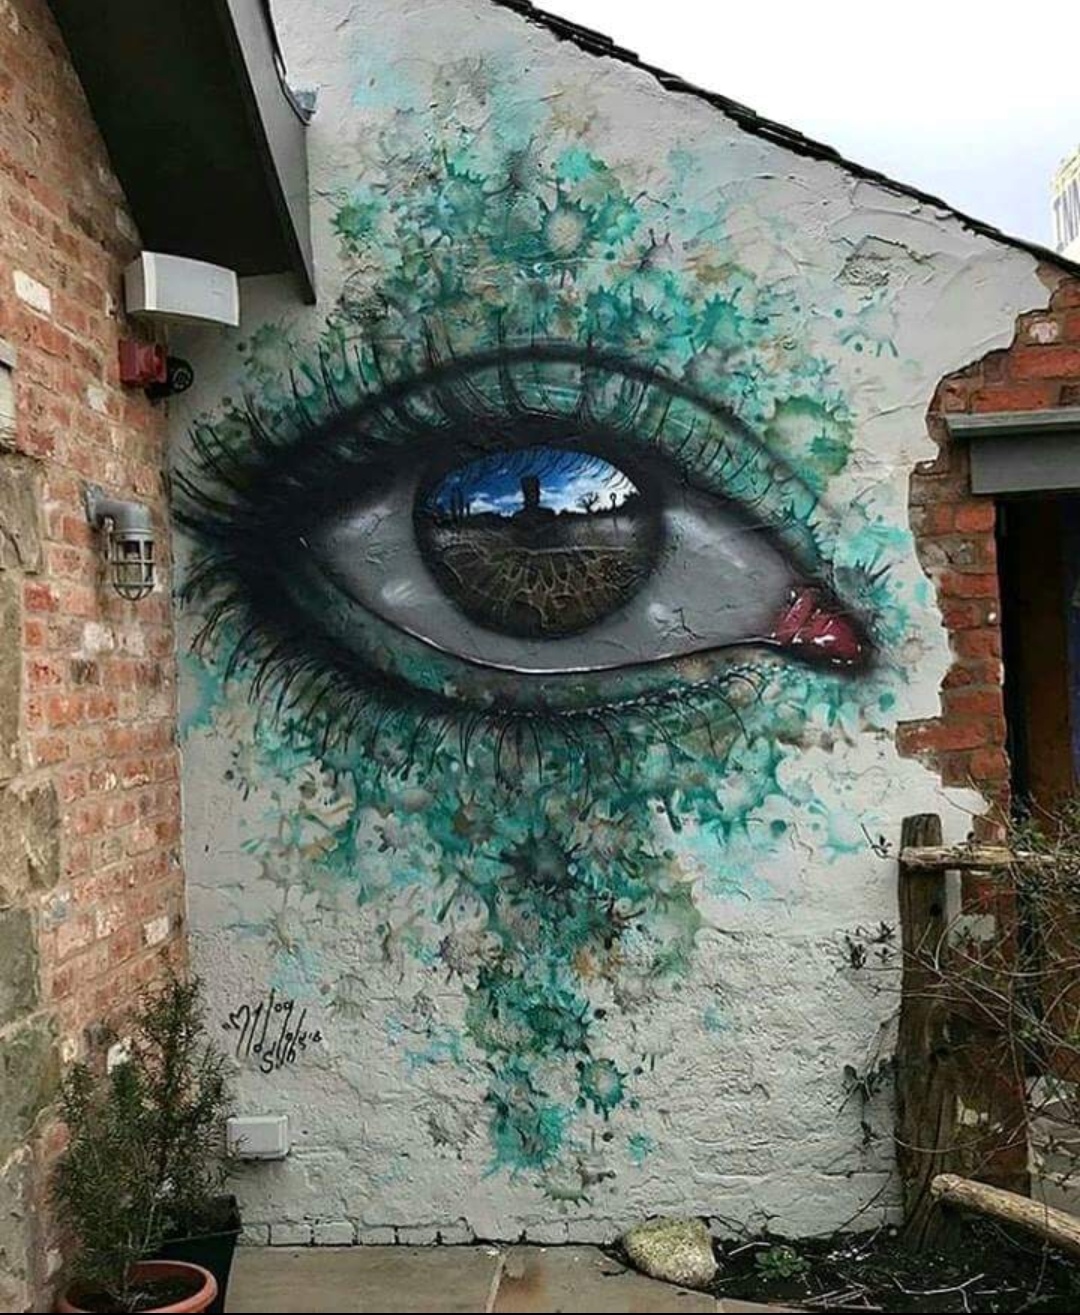 painting of eye on brick wall that looks amazingly detailed